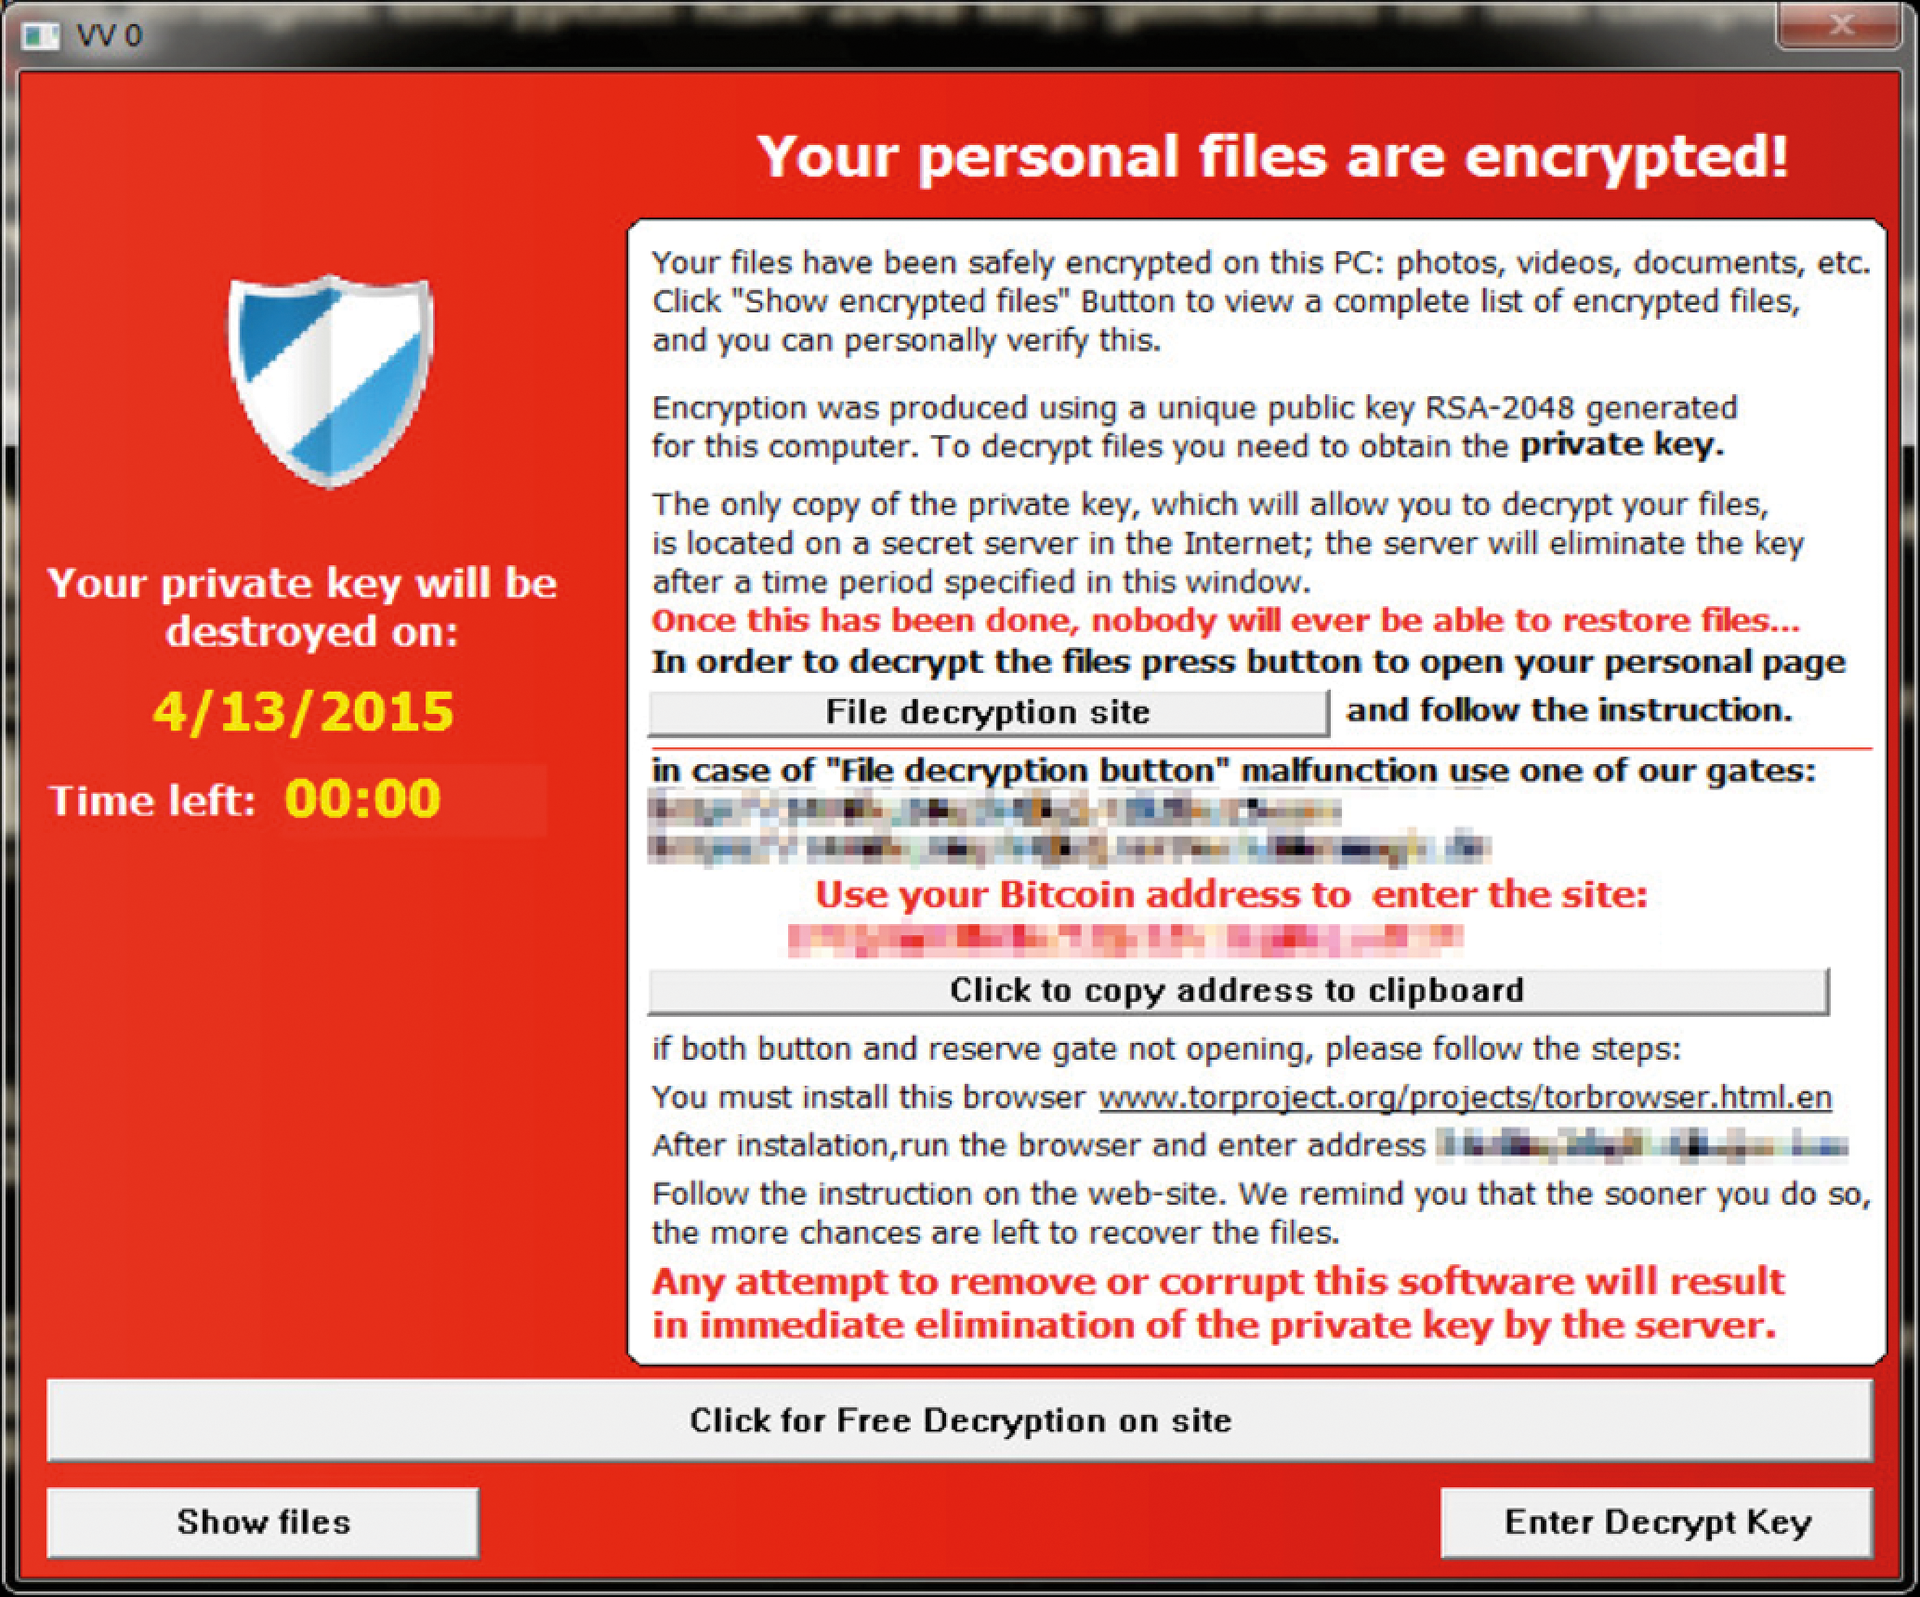 If you see this window, TeslaCrypt has encrypted your files and is asking for a ransom in Bitcoins. 